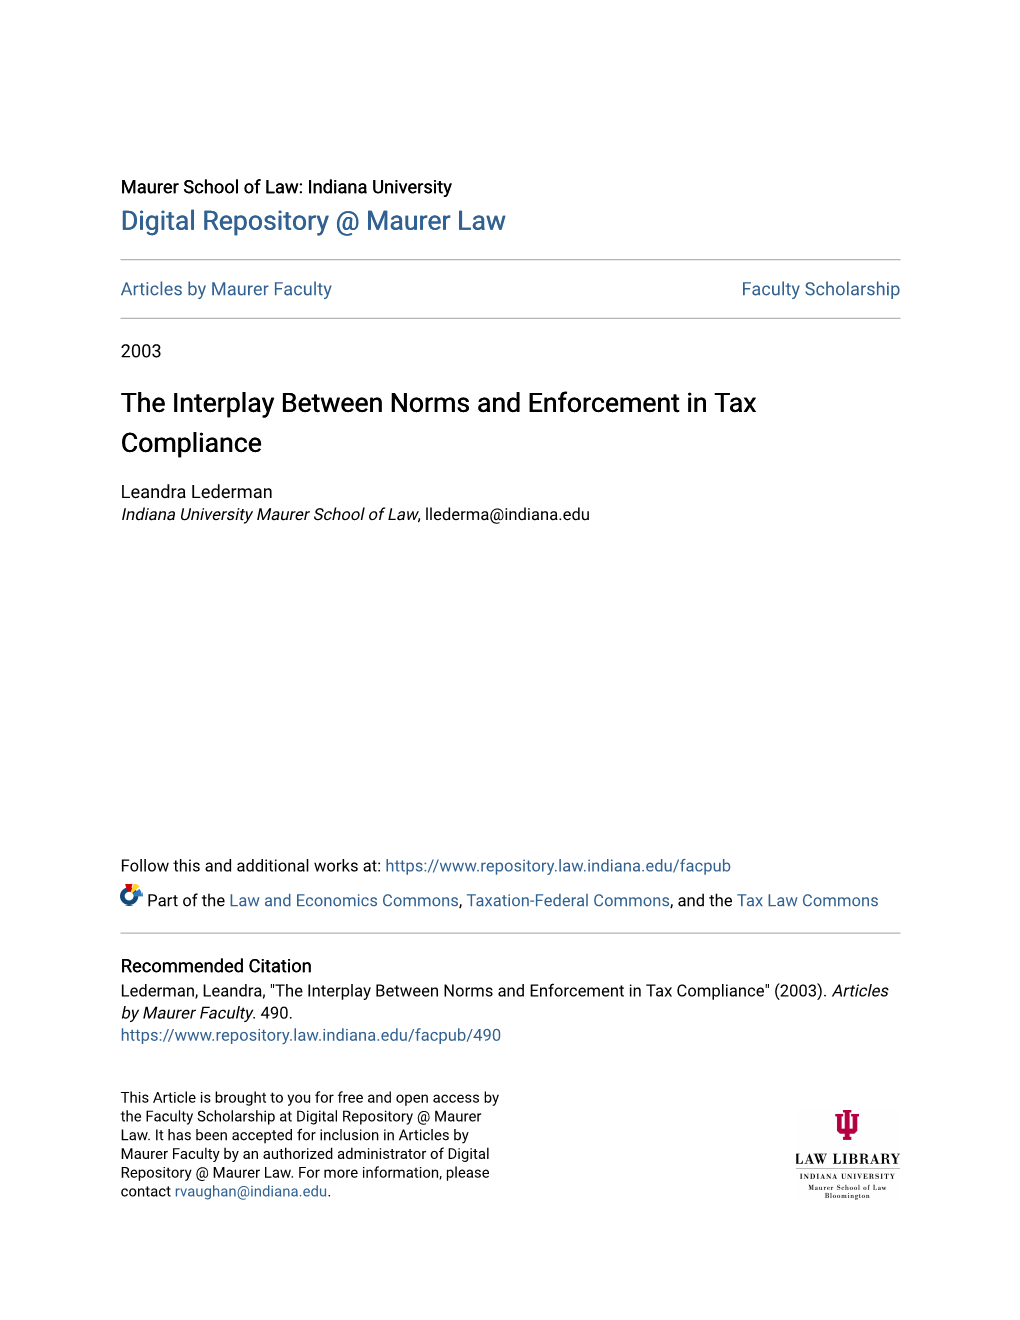 The Interplay Between Norms and Enforcement in Tax Compliance